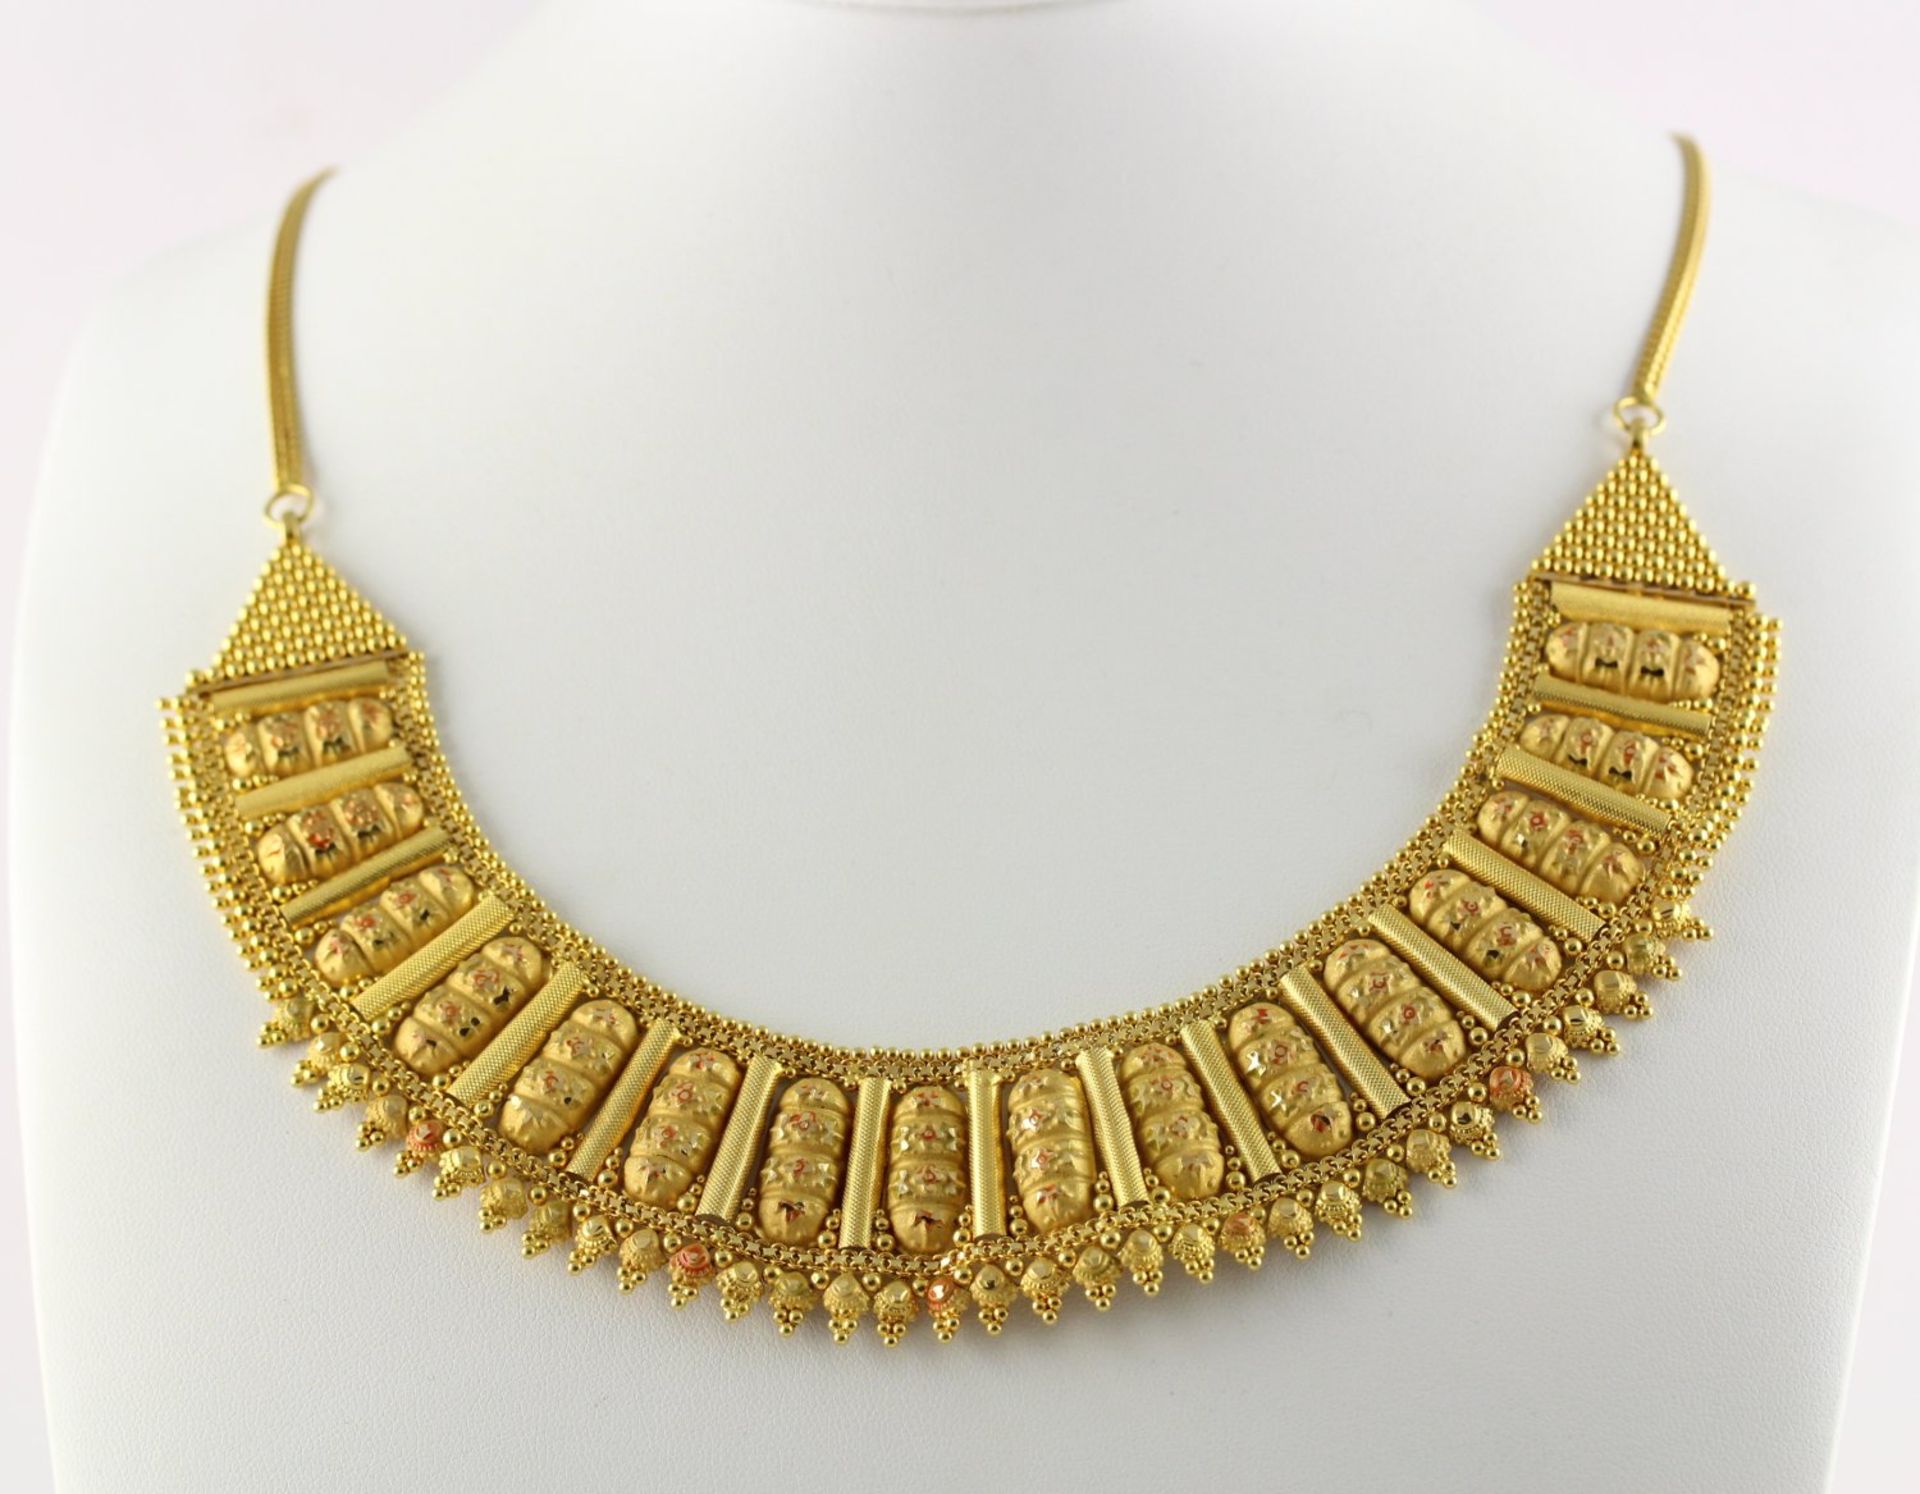 COLLIER, 900/ooo Gelbgold, - Image 2 of 2